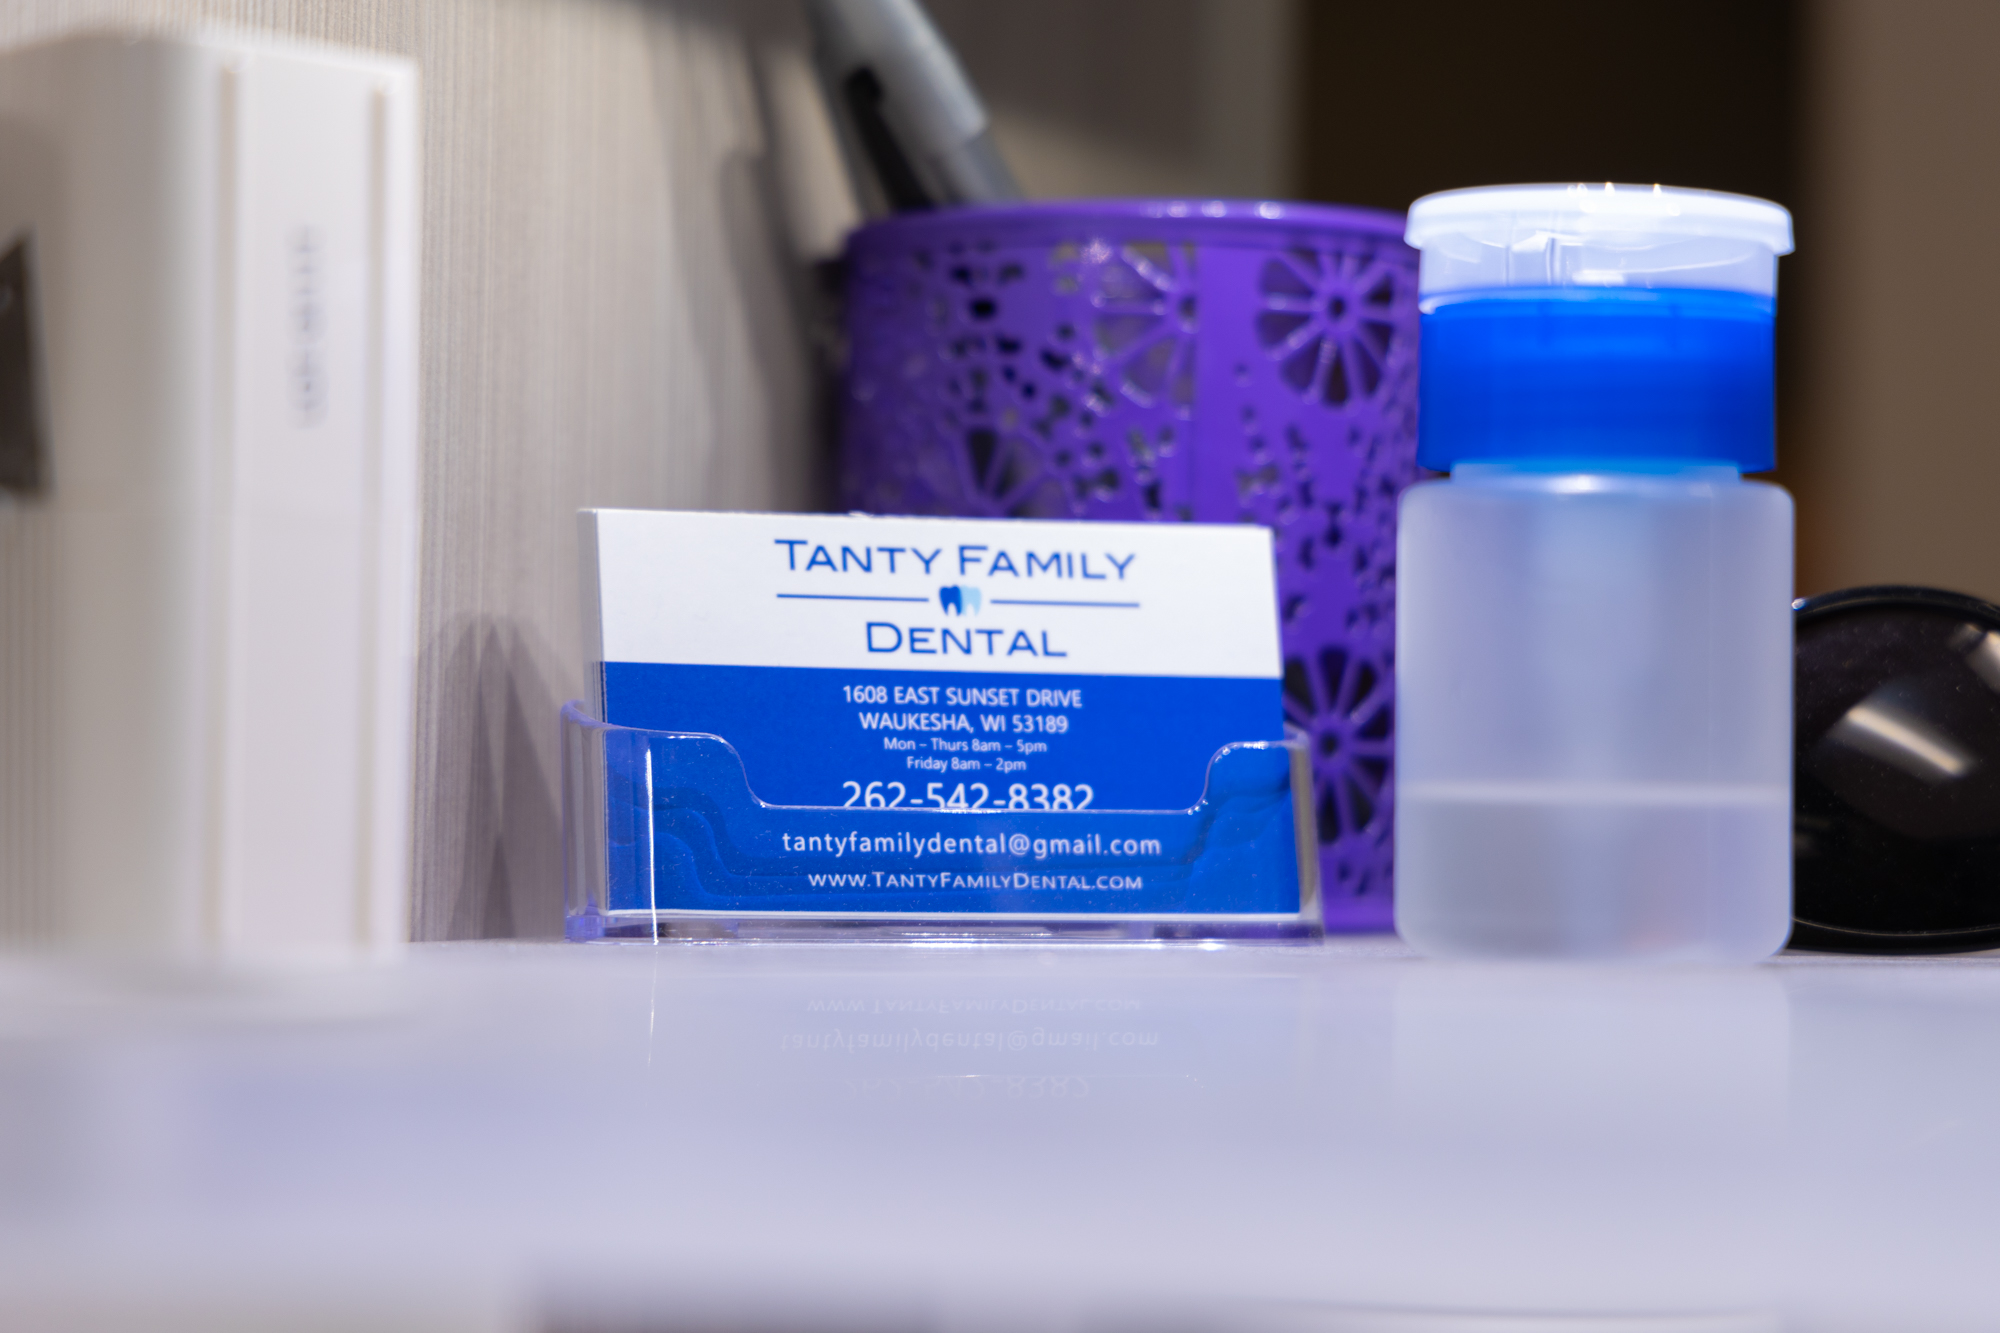 Contact Tanty Family Dental today